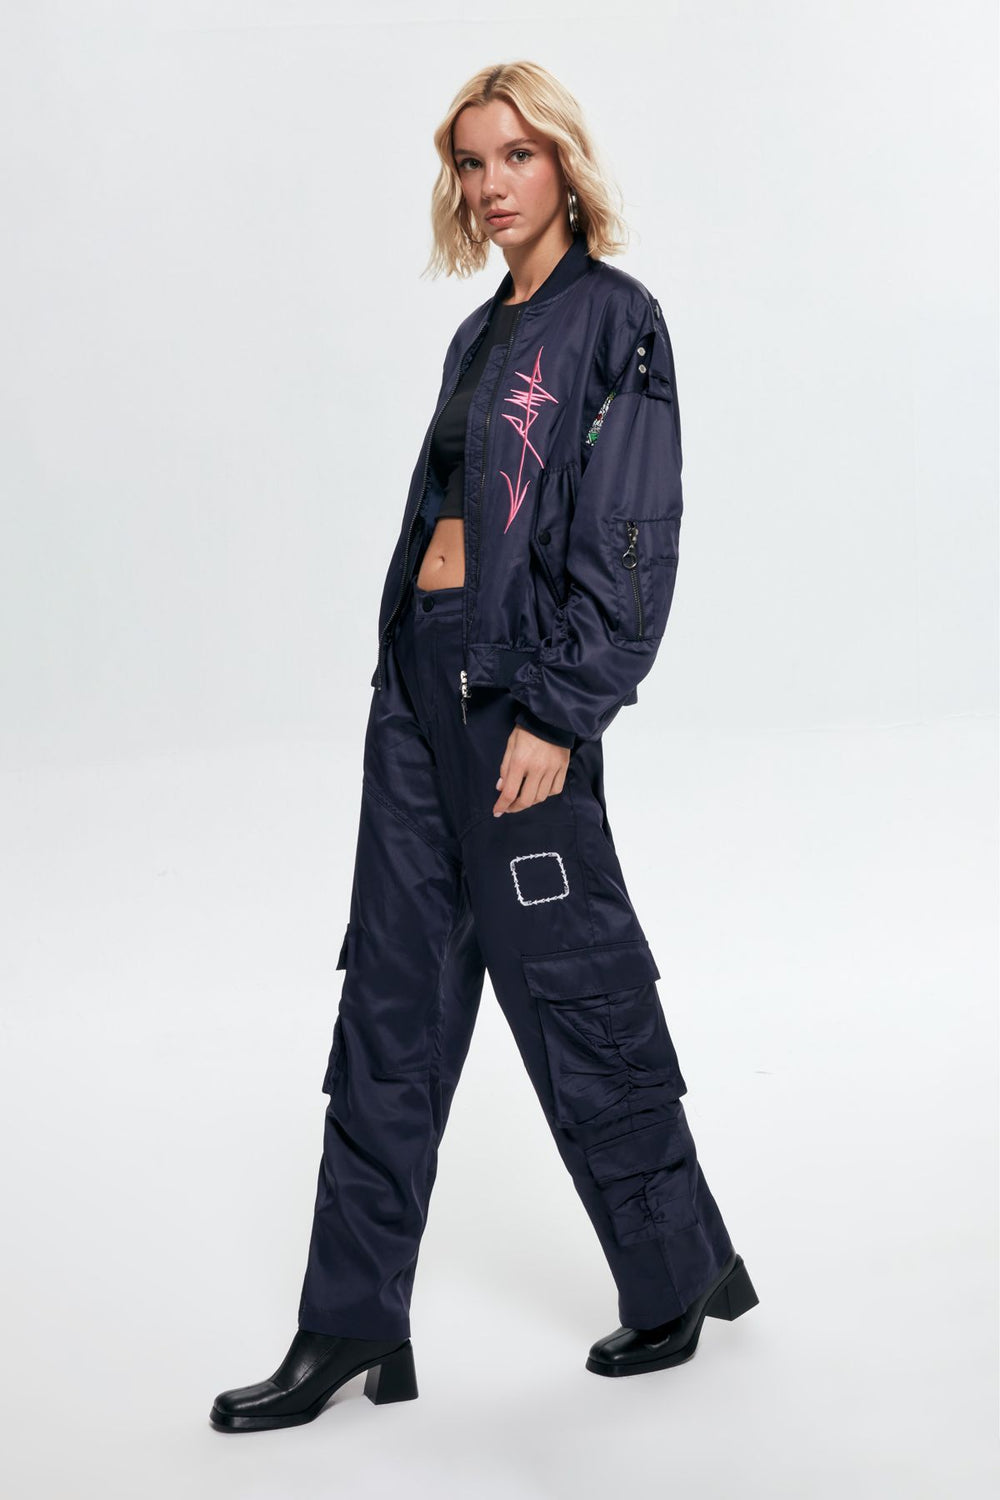 Embroidery Detailed Pocket High Waist Trousers Navy Blue